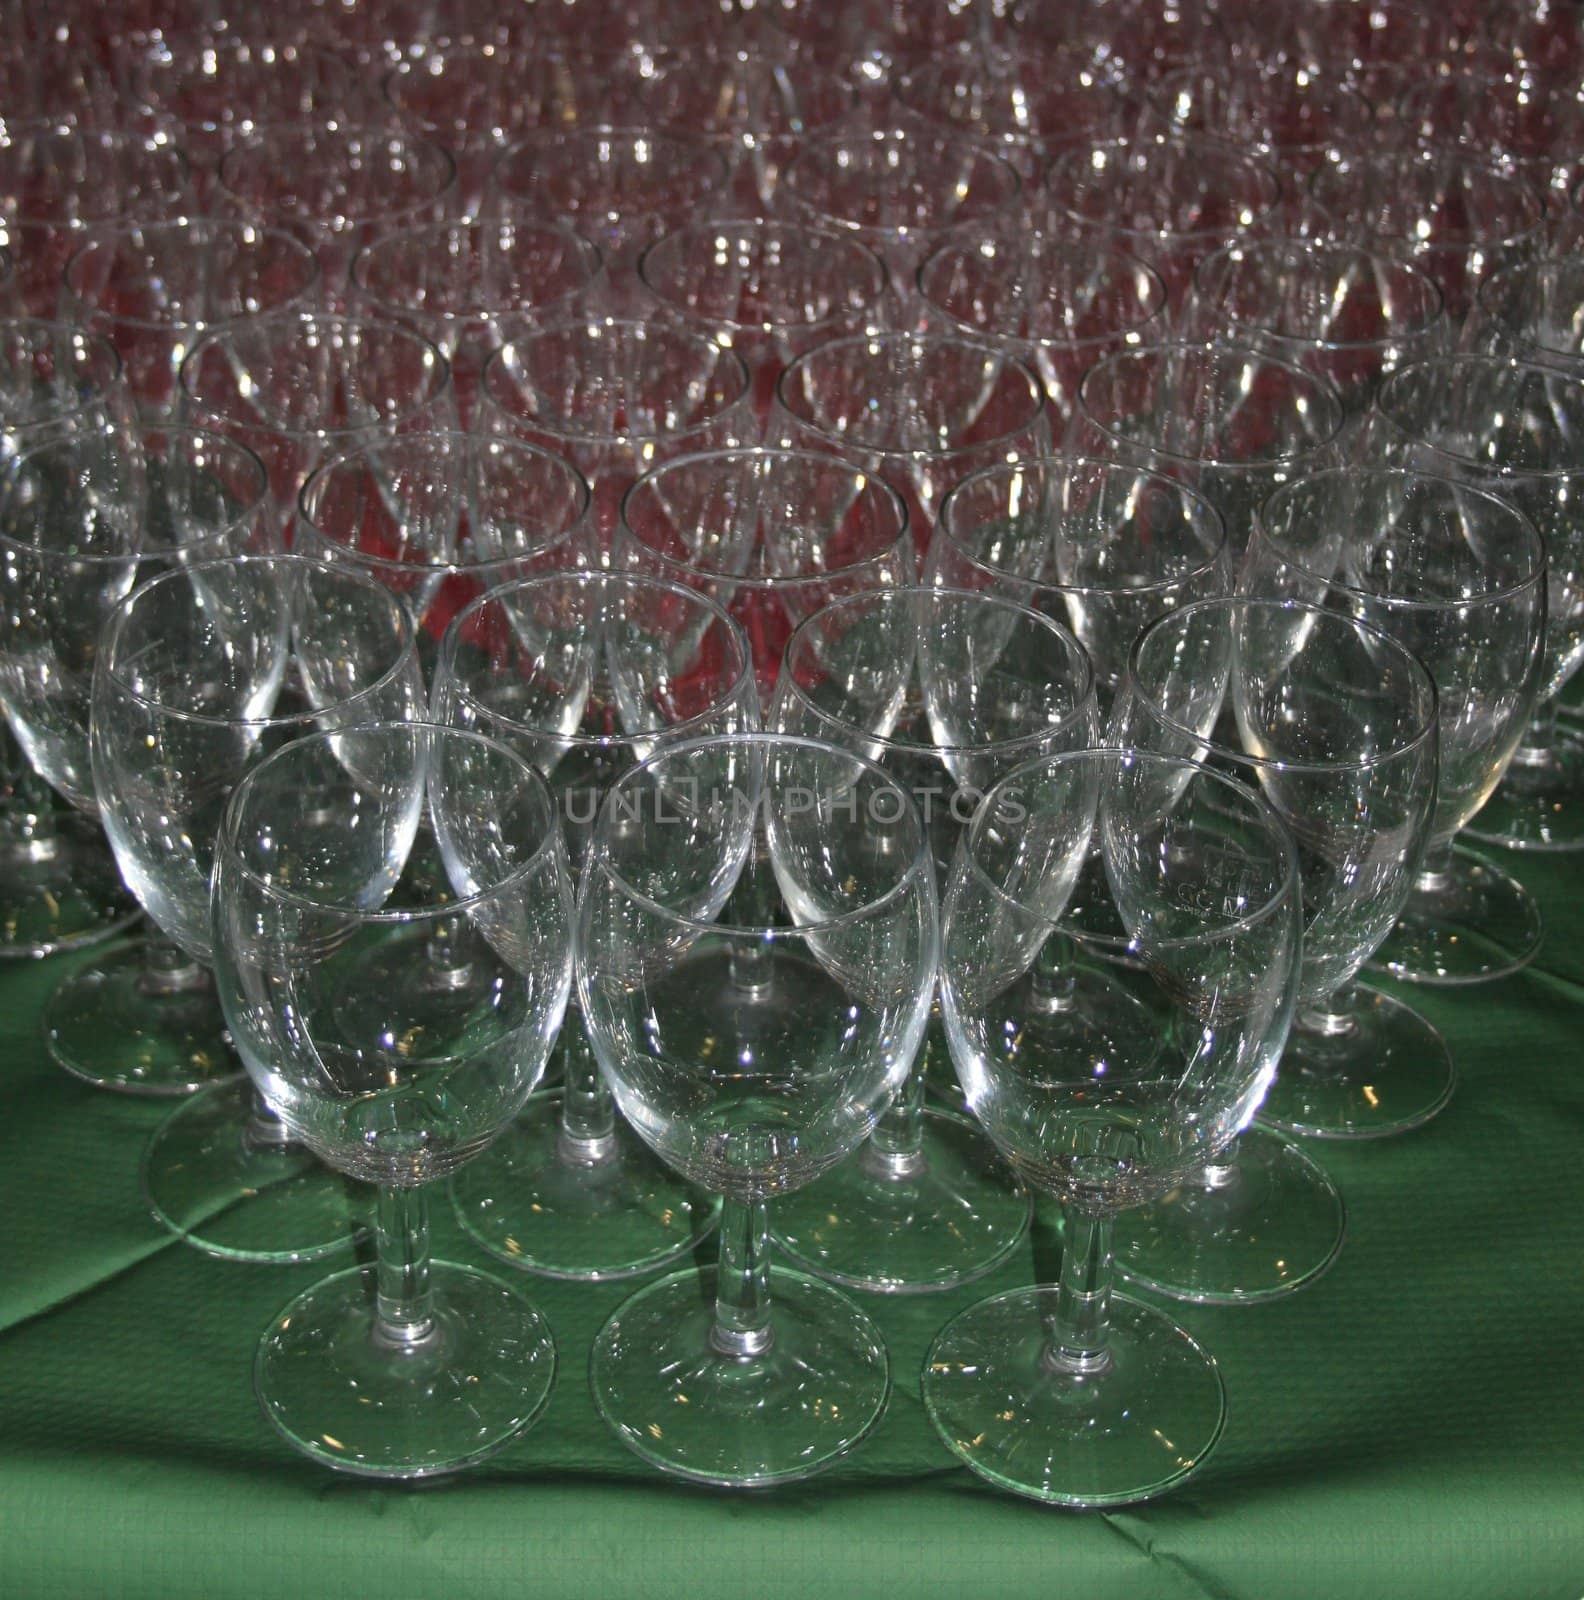 Wine glasses set out for a festive party.